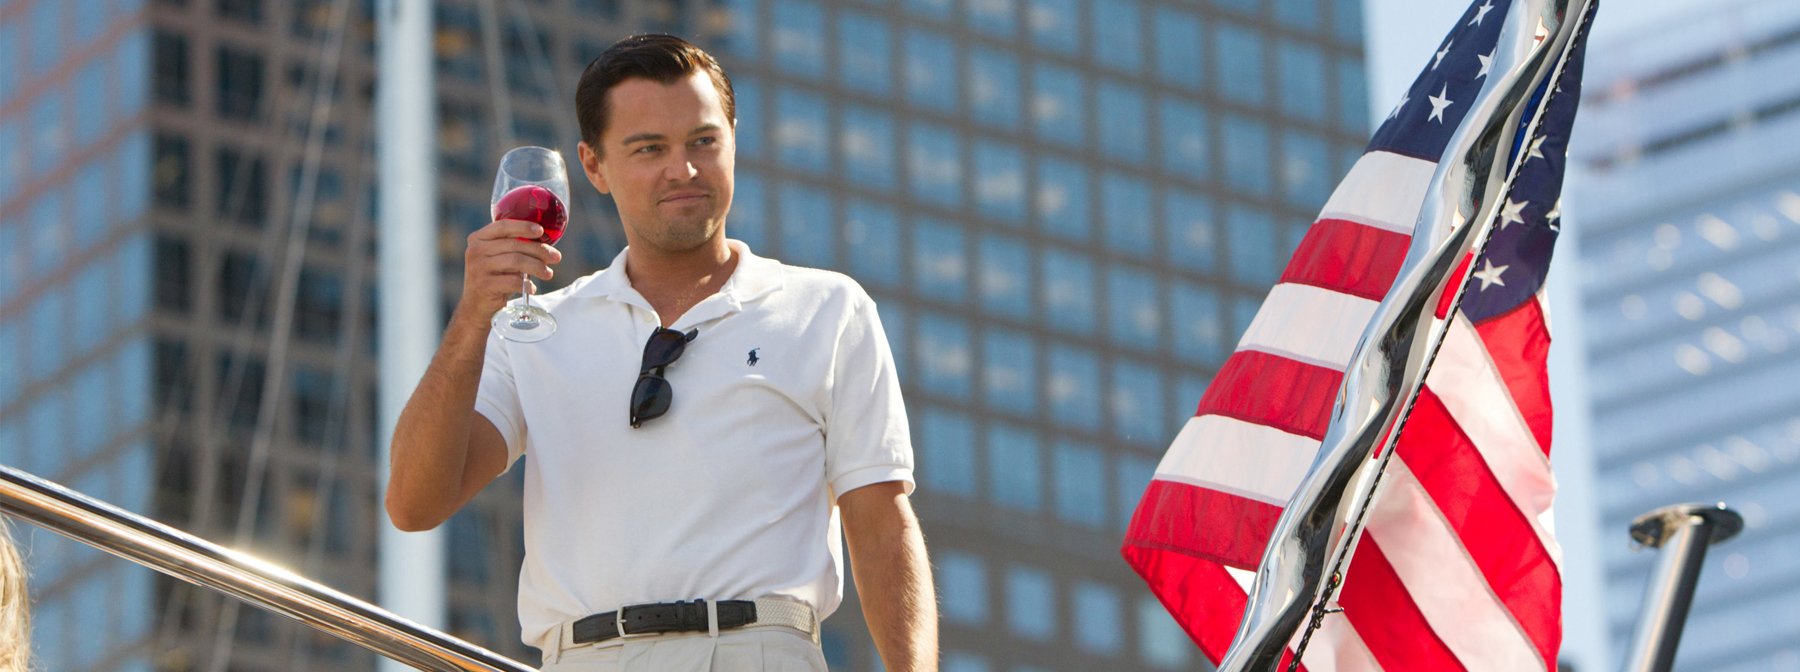 Jordan Belfort (Leonardo DiCaprio) stands beside the American flag raising a glass of wine in The Wolf of Wall Street (2013)